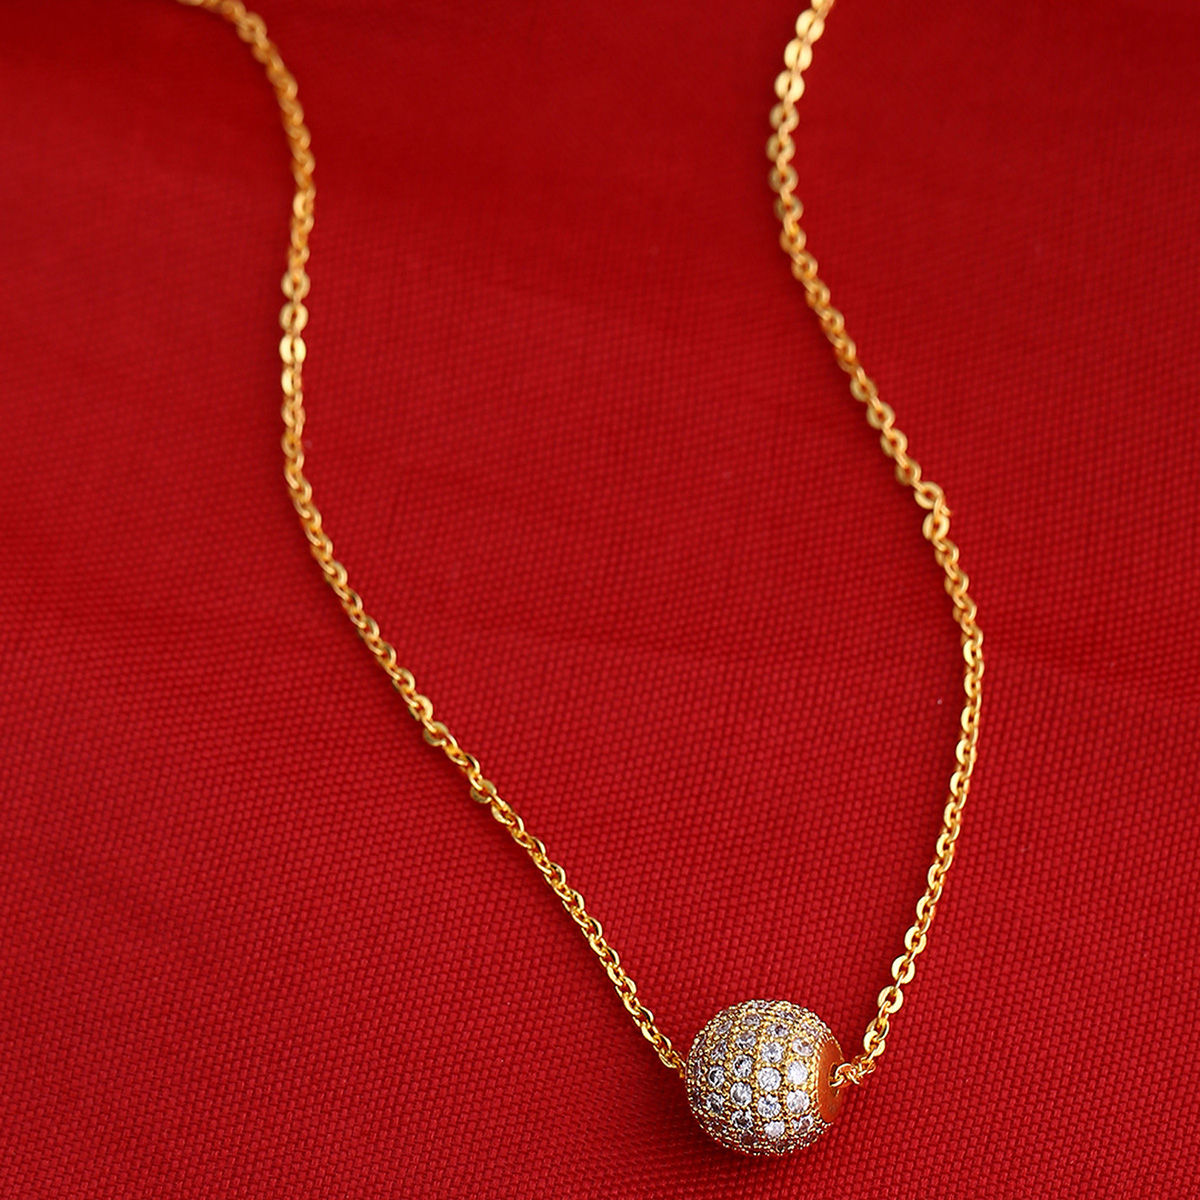 Wholesale simple design small ball 14k gold plated silver 925 necklace  women From m.alibaba.com